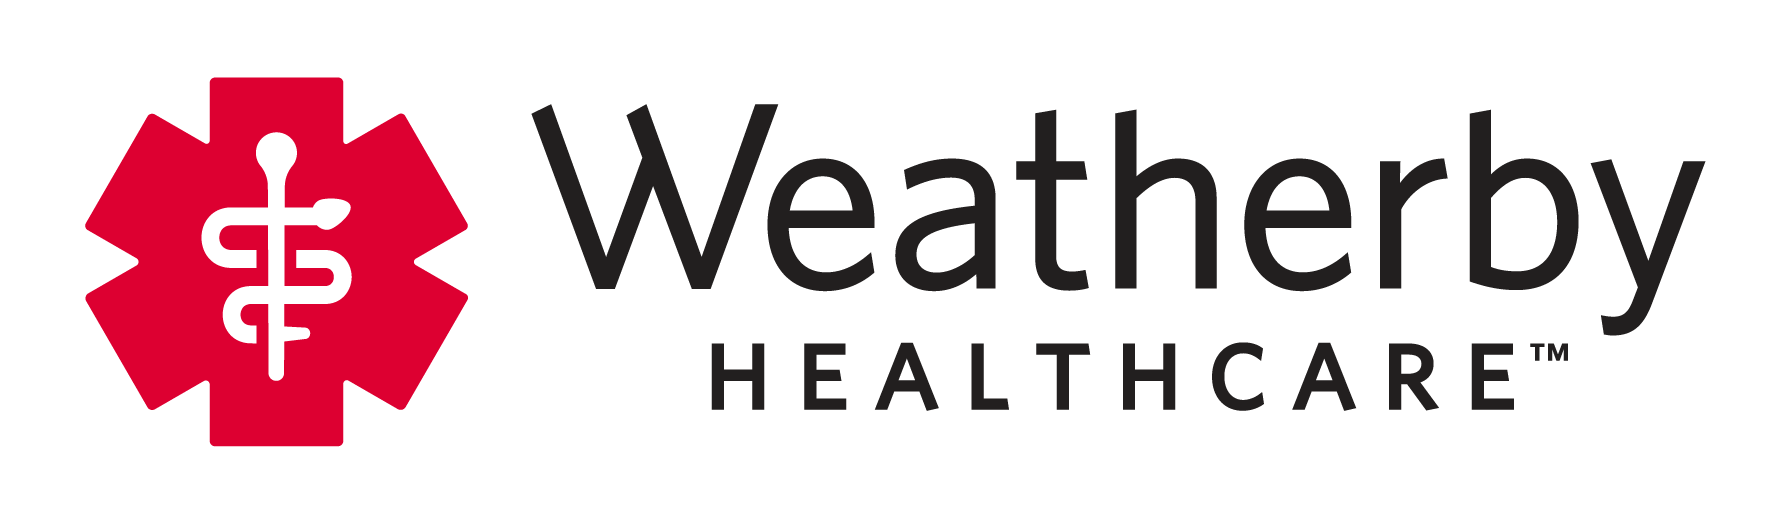 Weatherby Healthcare logo